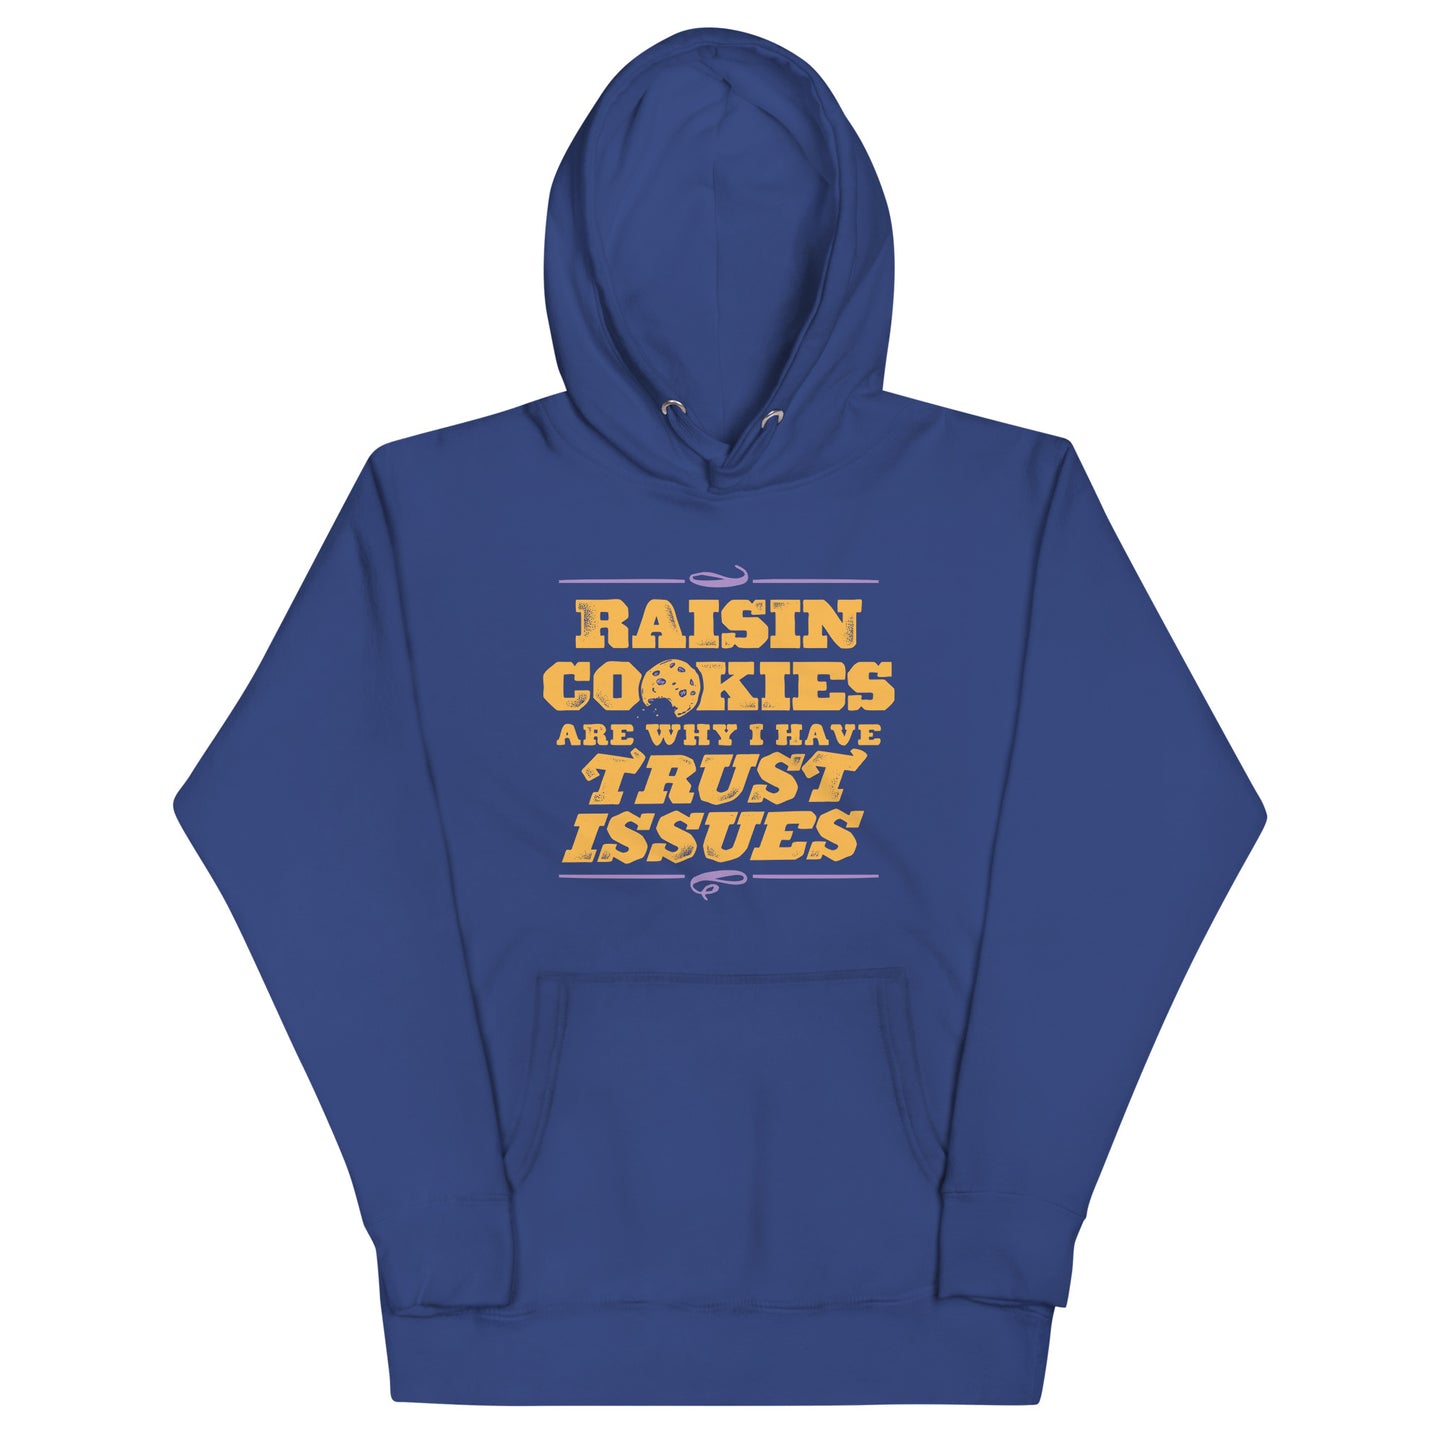 Raisin Cookies Are Why I Have Trust Issues Unisex Hoodie